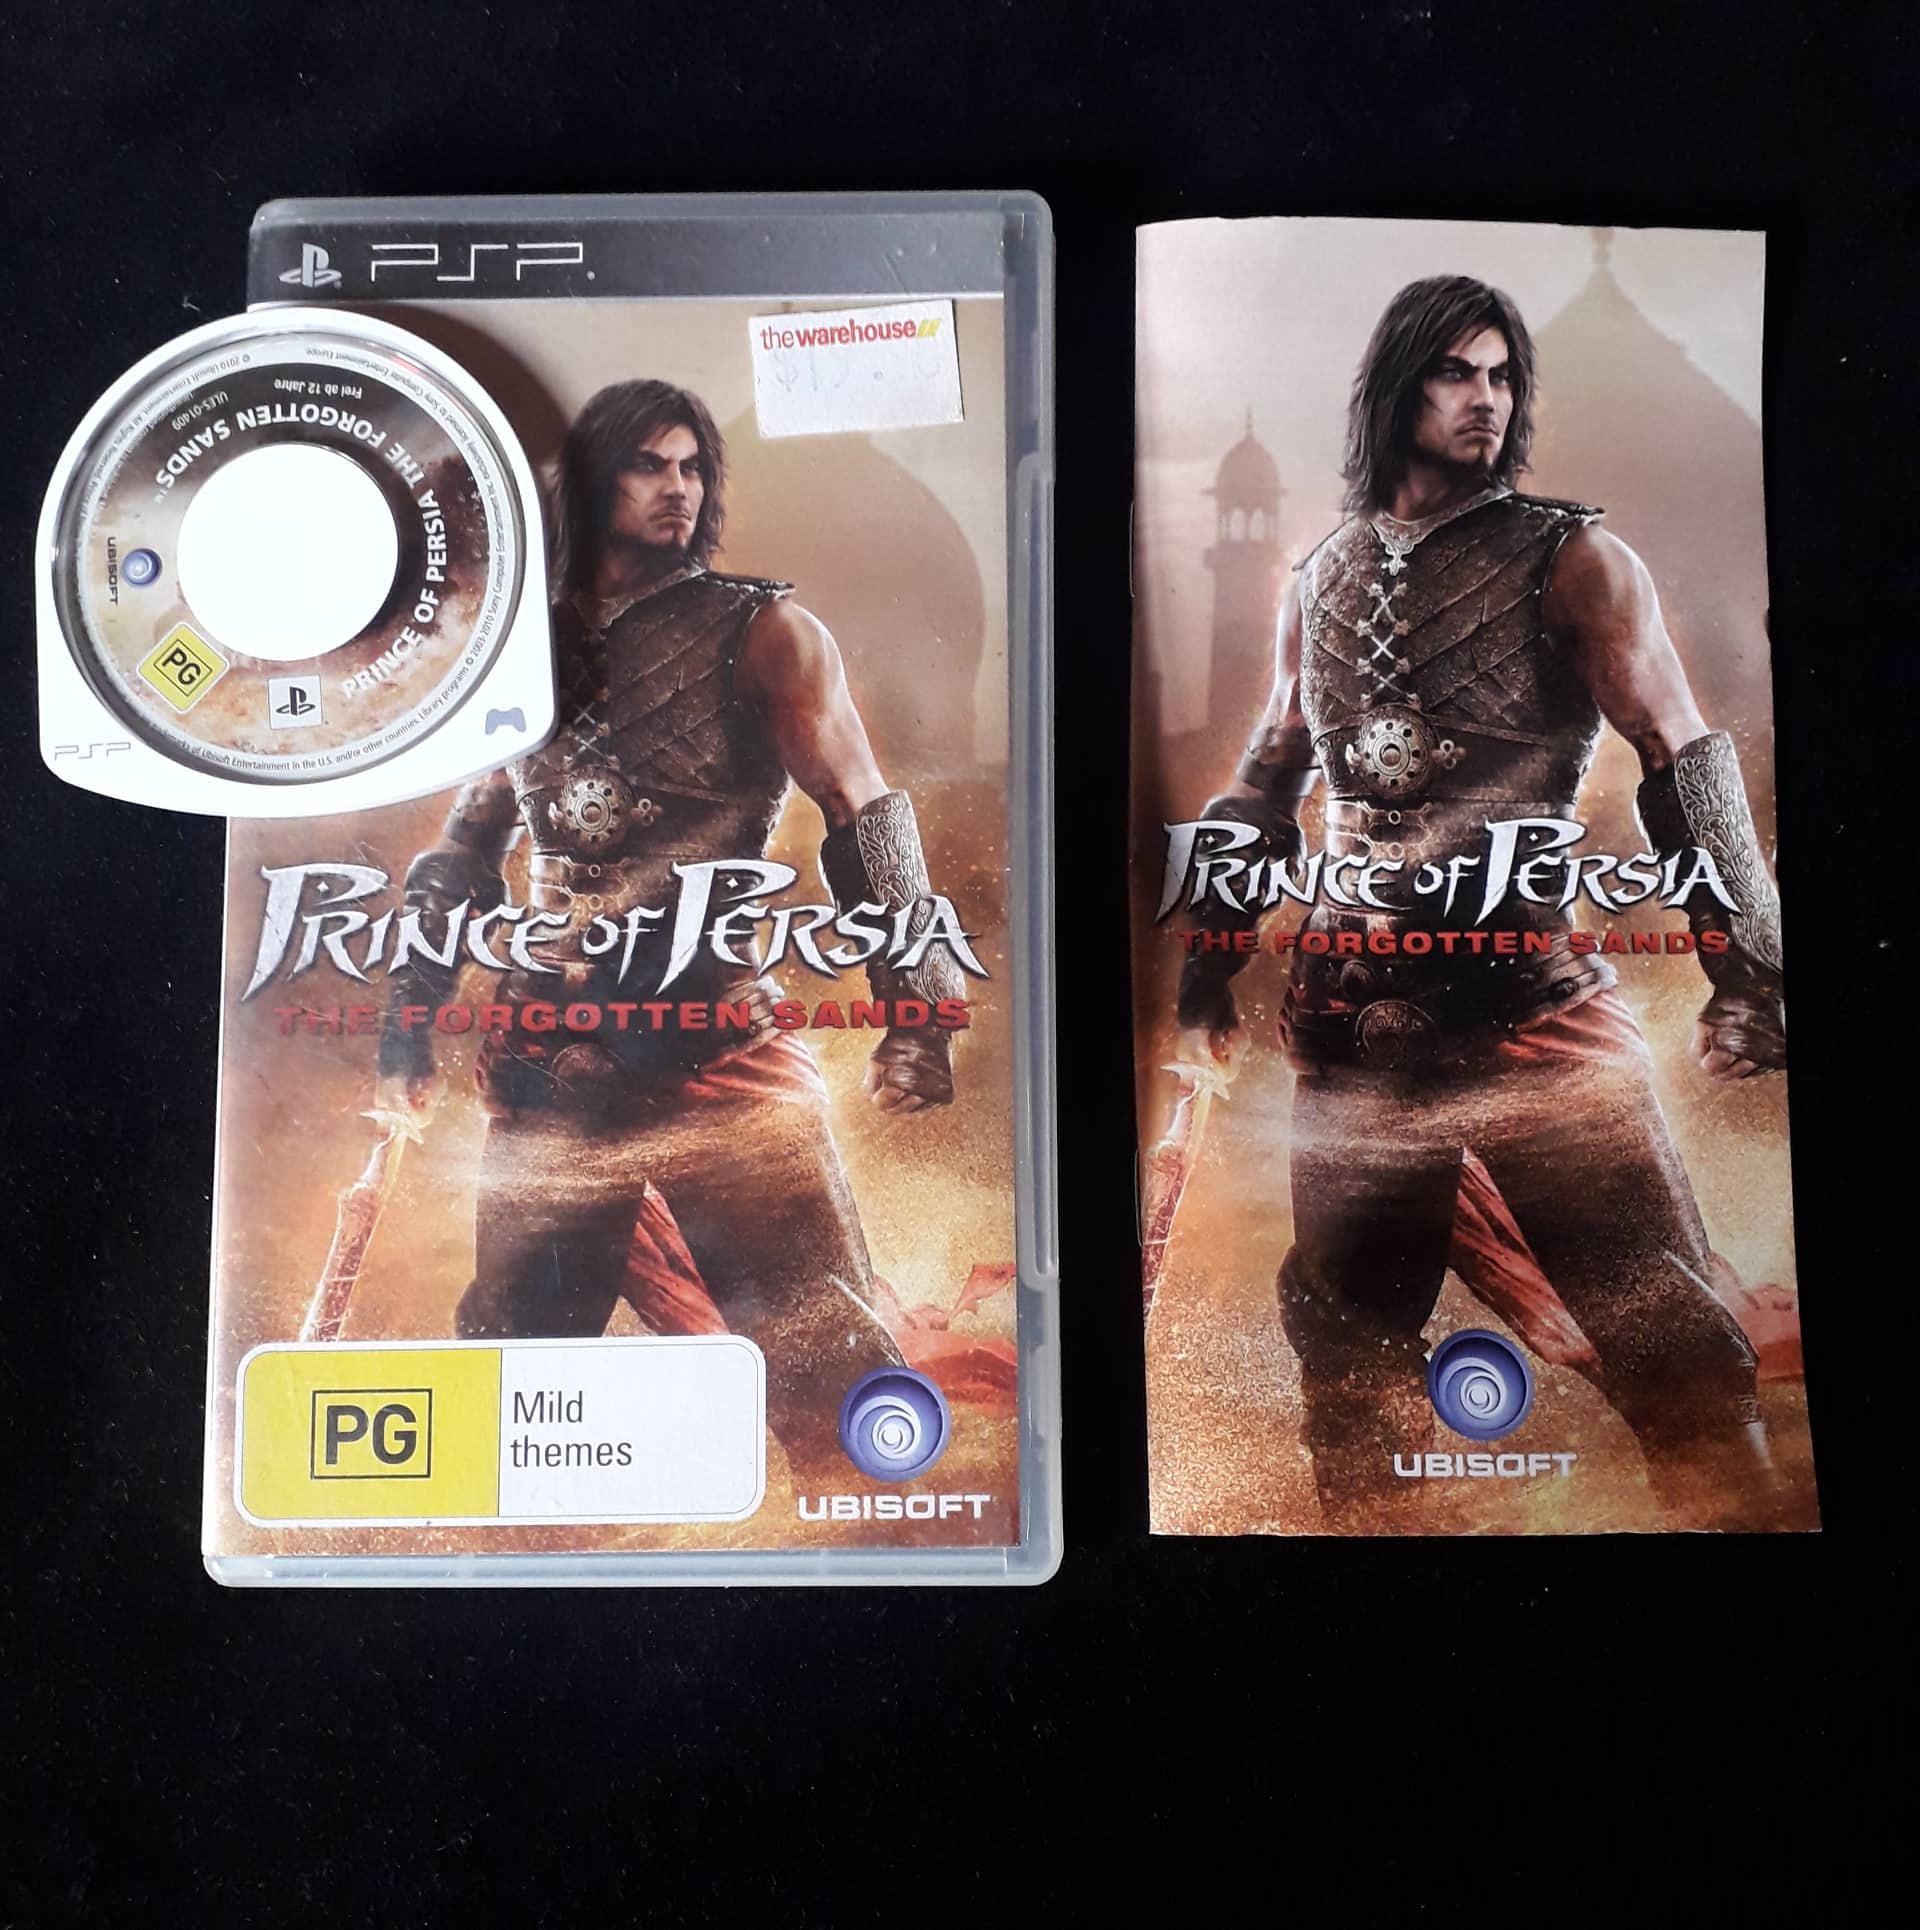 Buy Prince of Persia: The Forgotten Sands™ from the Humble Store and save  80%